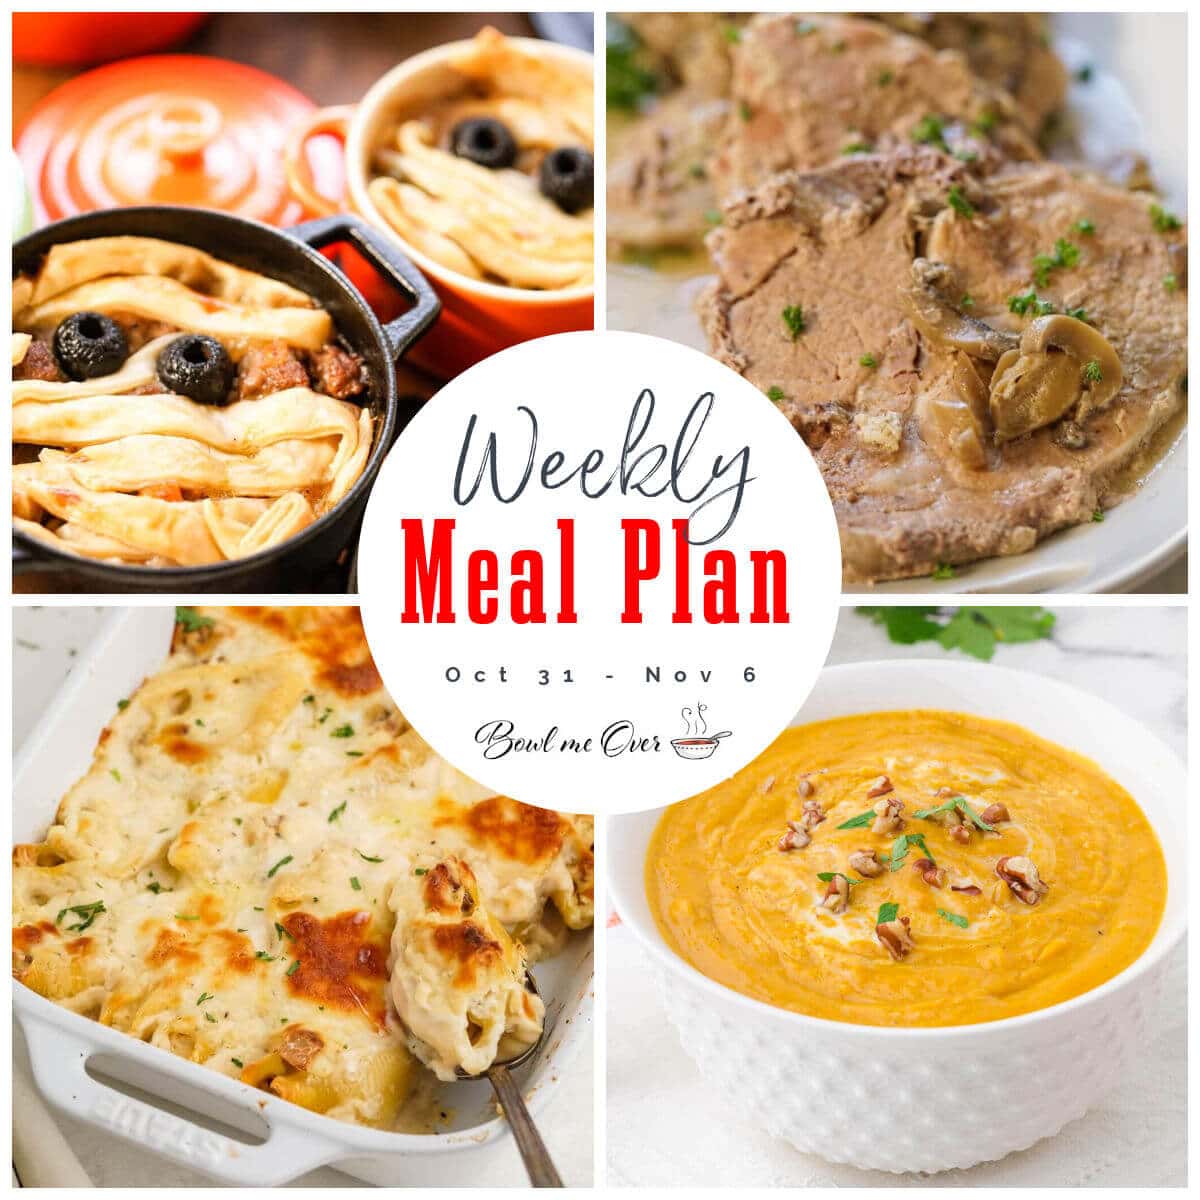 Collage of photos for weekly meal plan 43. With print overlay.